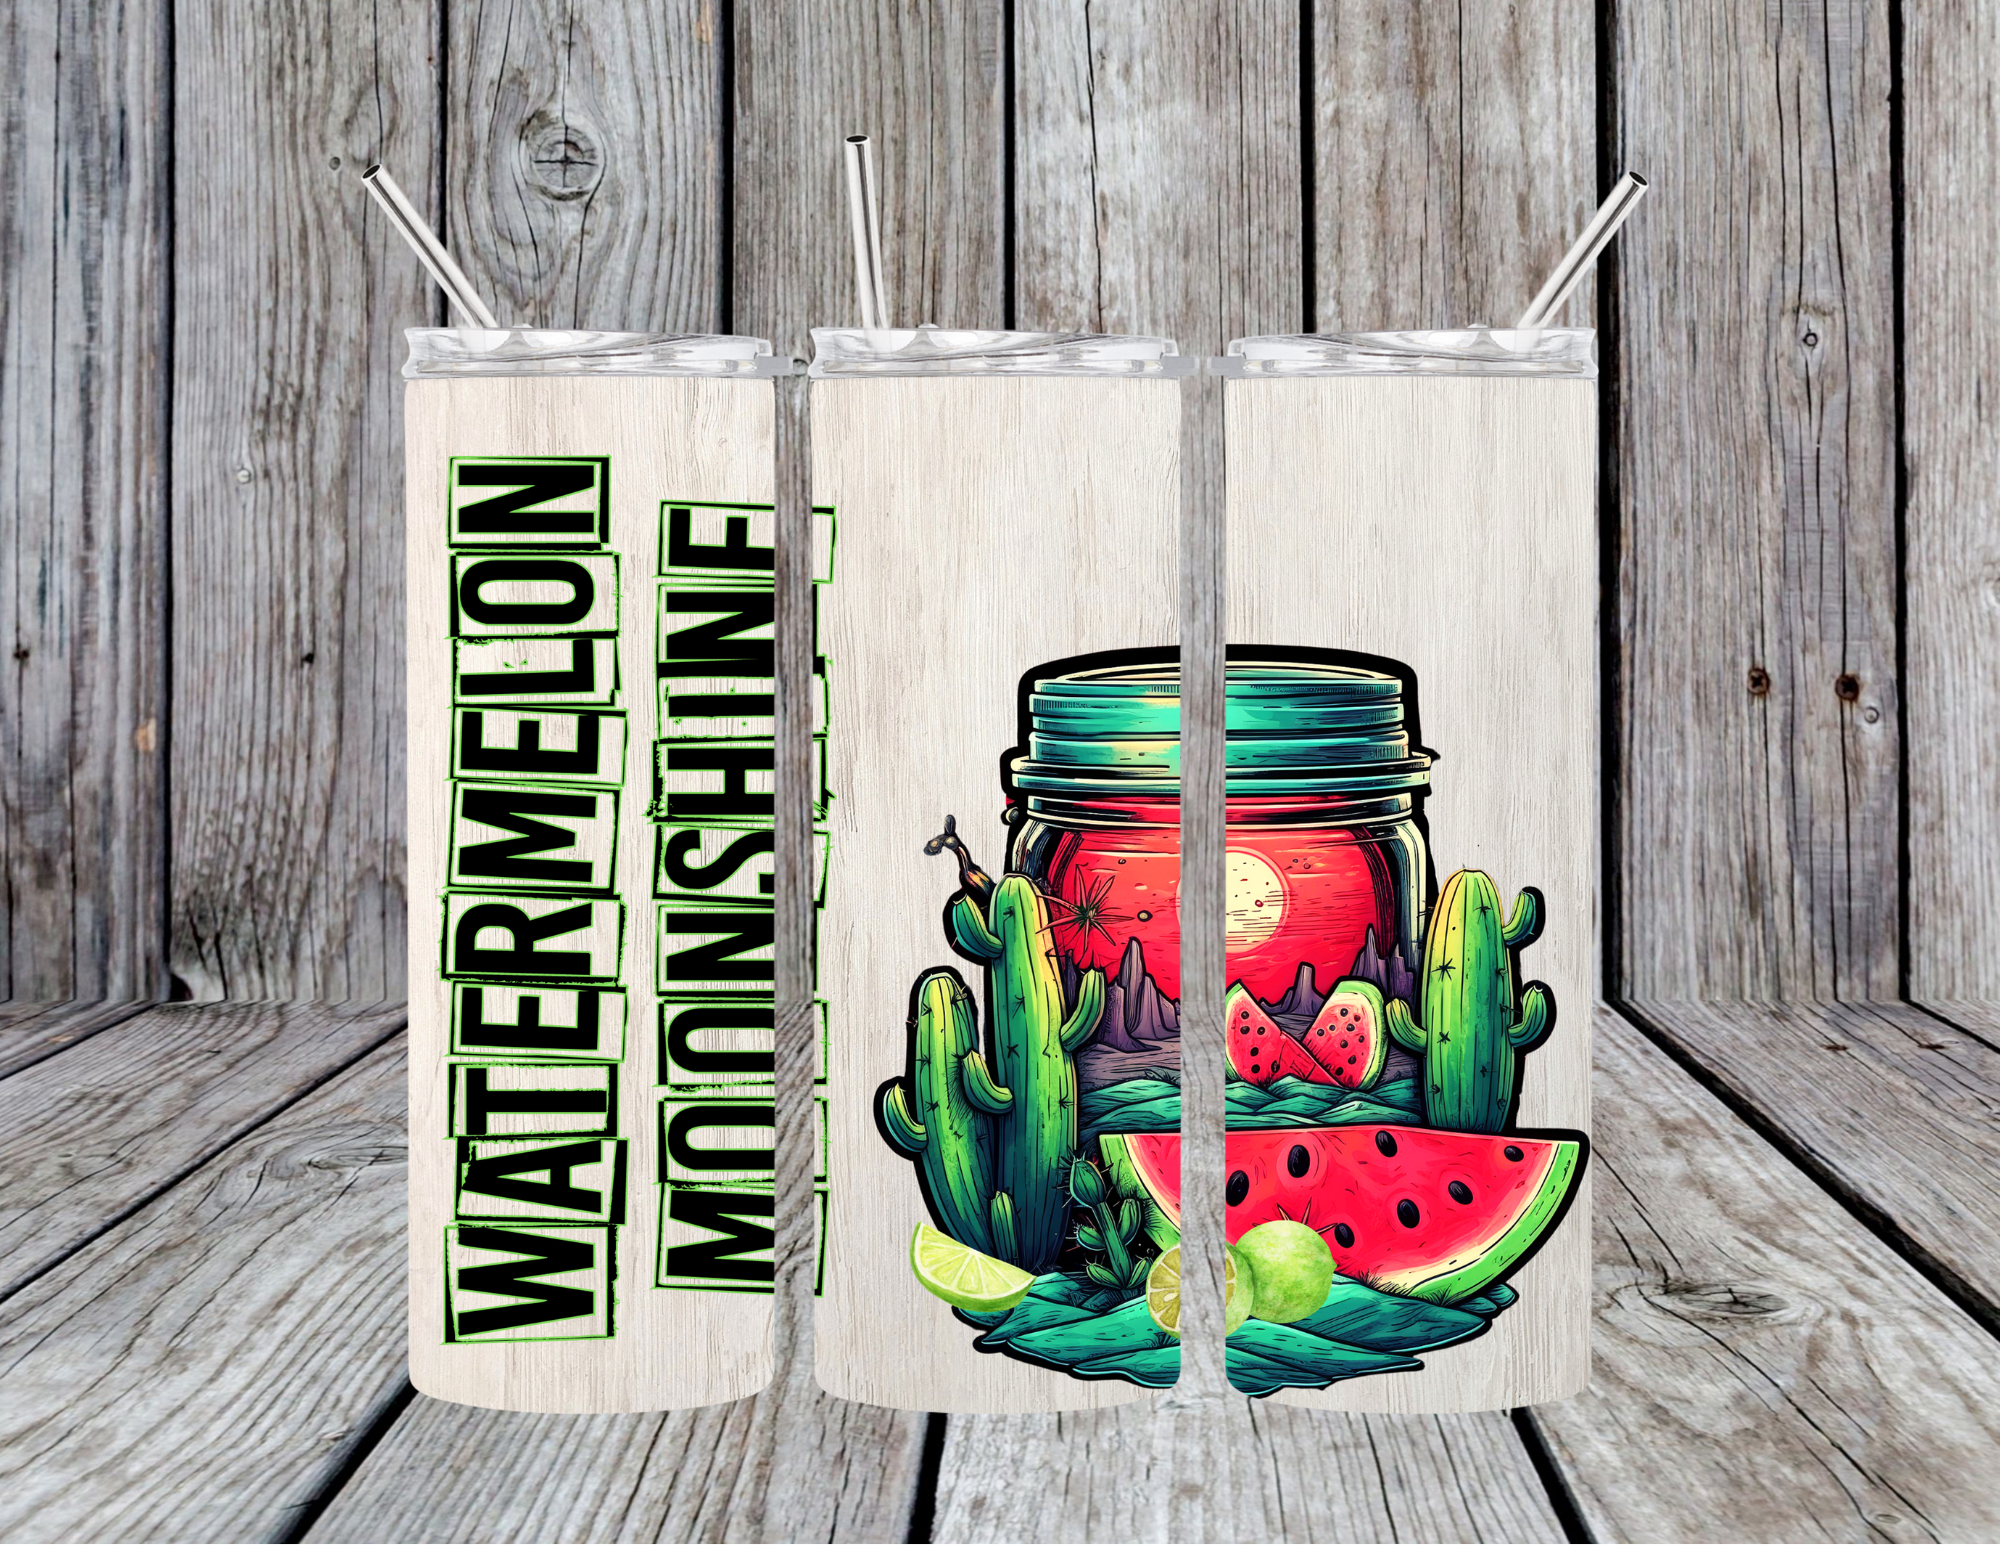 Limited Edition Laney Wilson Stanley! Watermelon Moonshine 40 oz